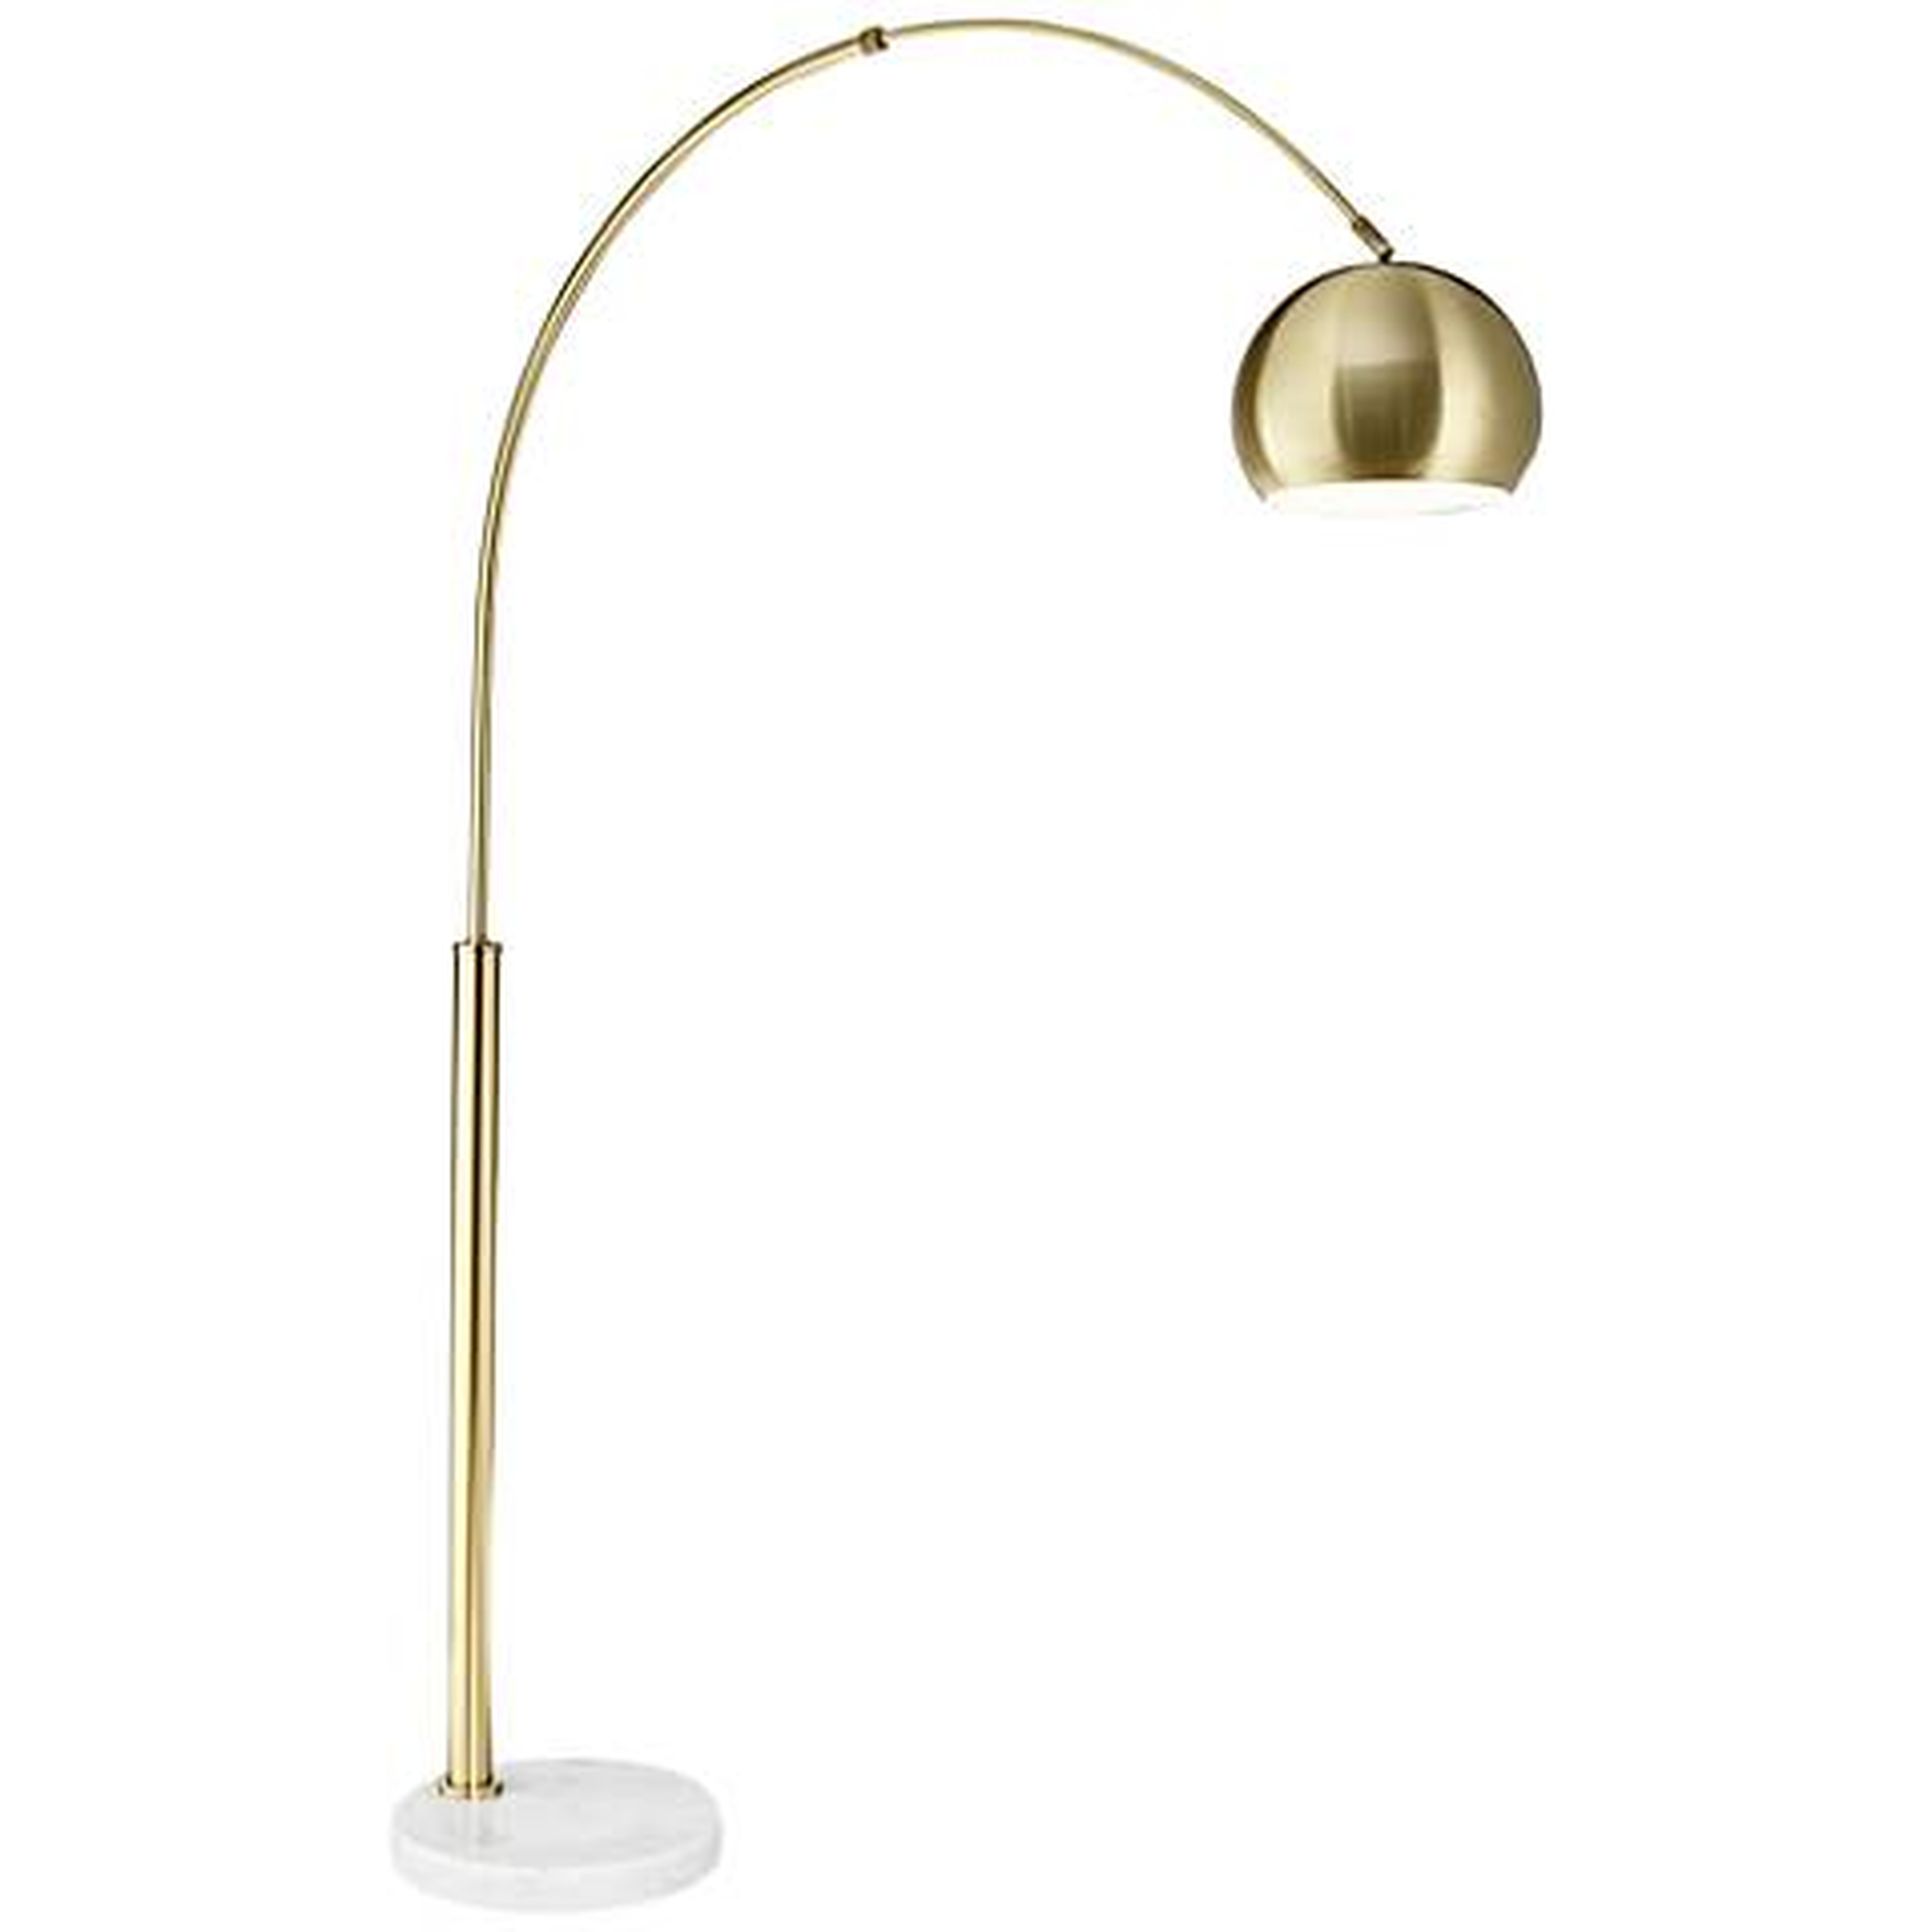 Basque Gold Finish Modern Arc Floor Lamp with White Marble Base - Lamps Plus